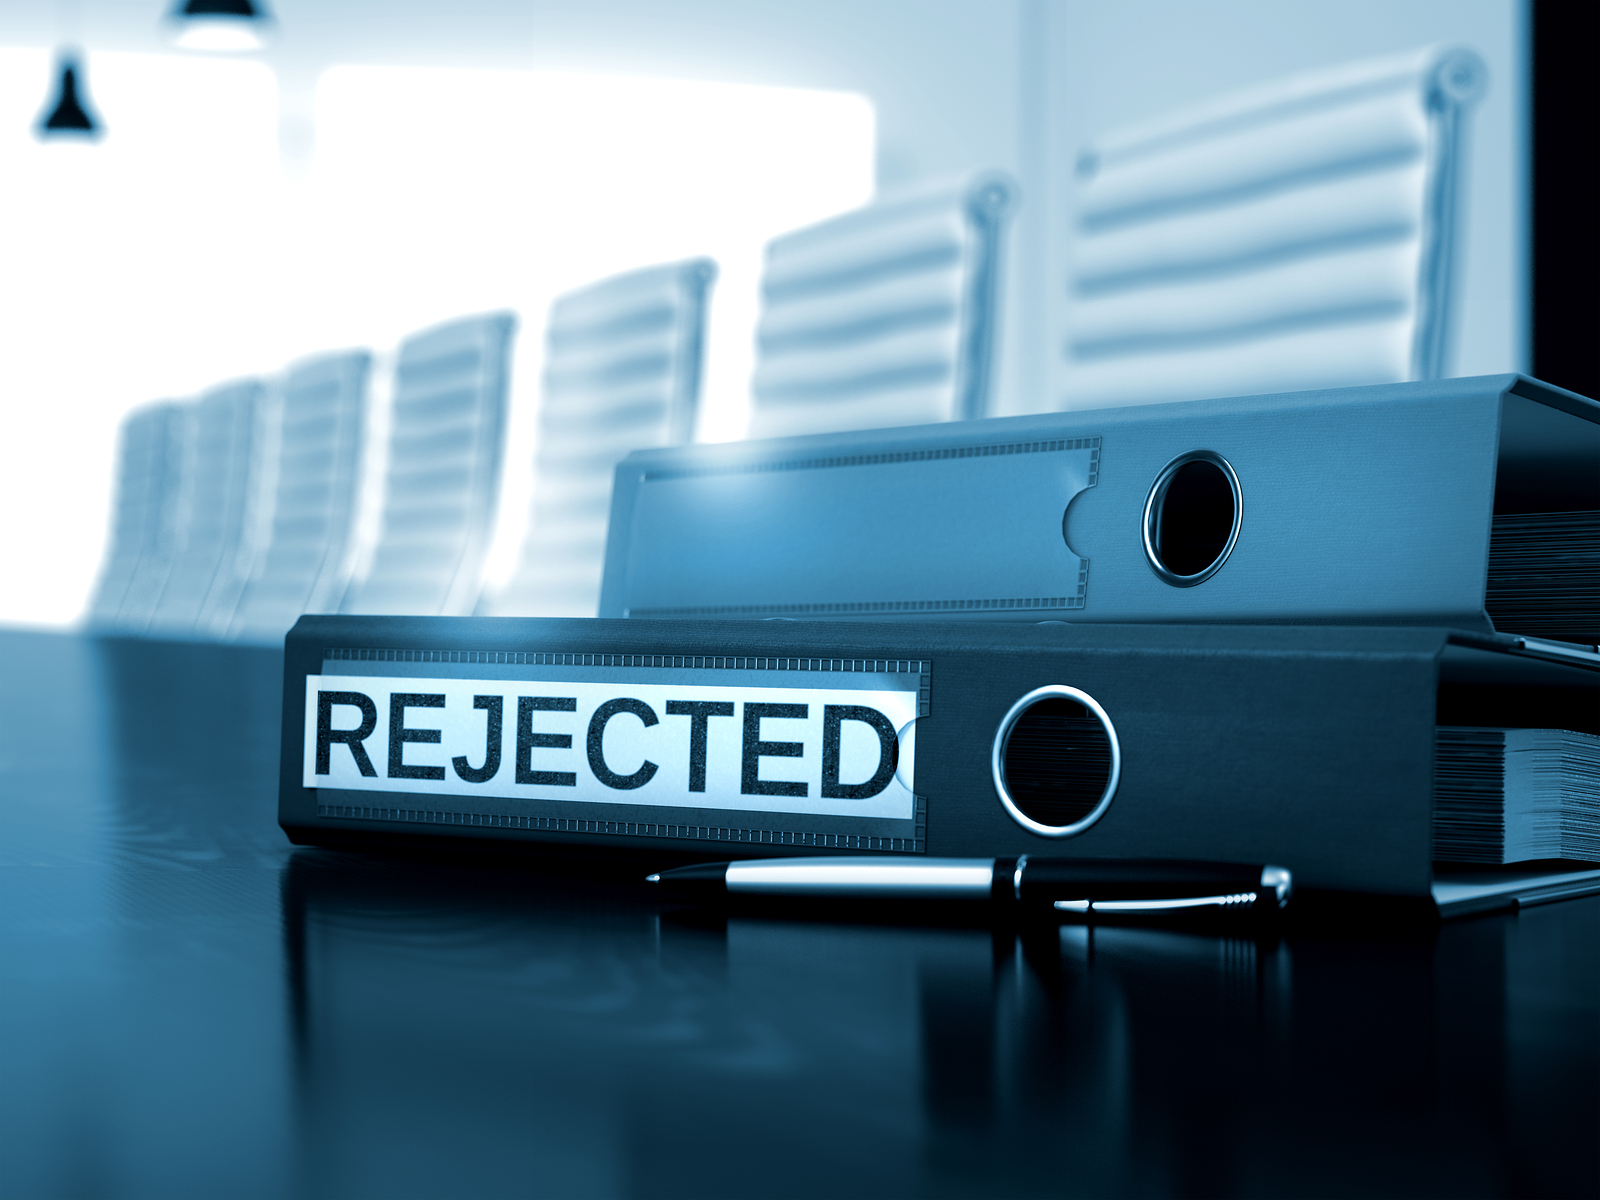 Was your patent application rejected?